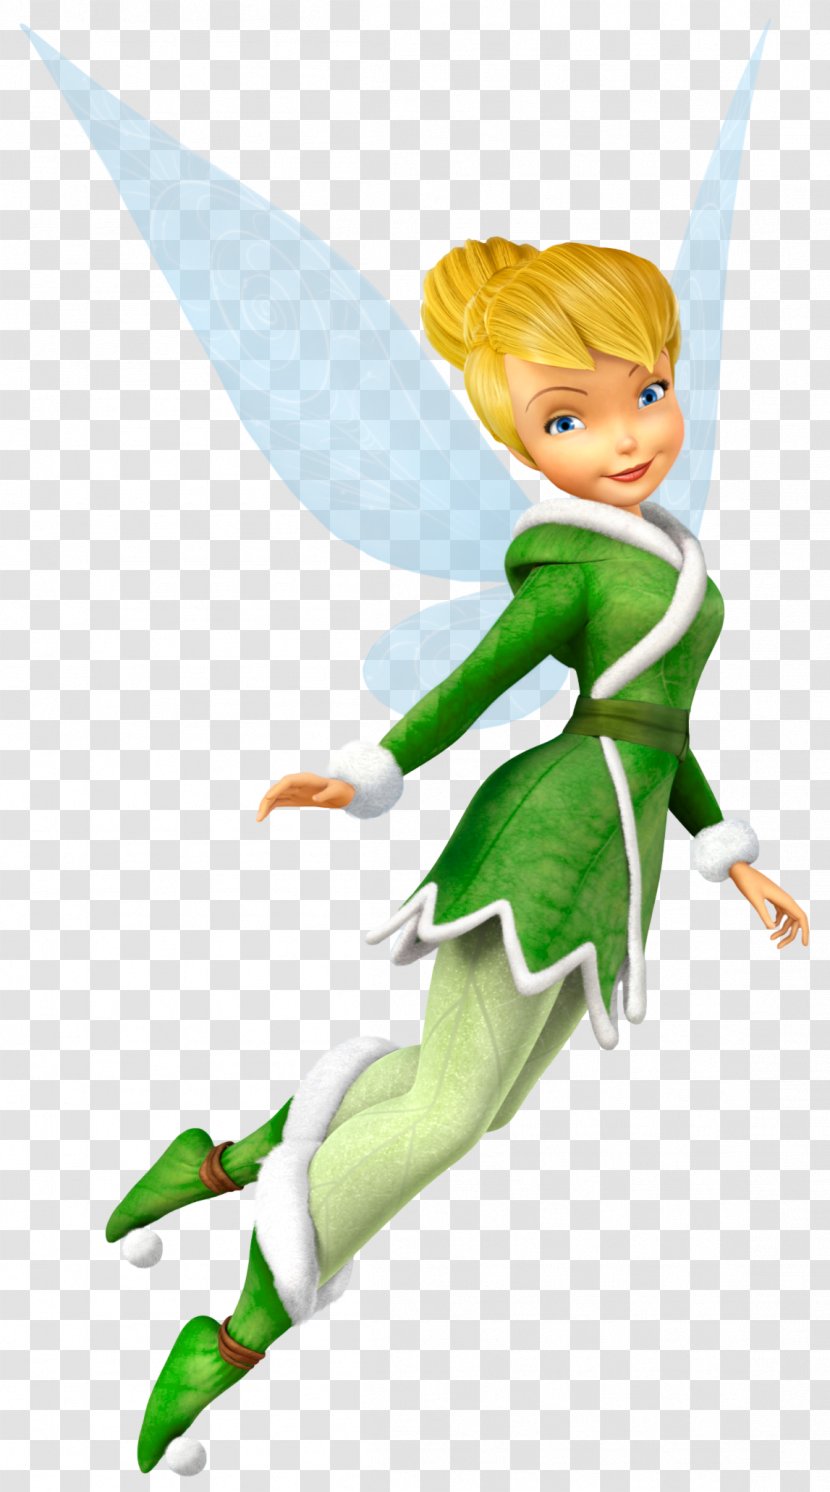 Freshly-Picked Tingle's Rosy Rupeeland Fairy - Disney Fairies - TinkerBell PNG Cartoon Transparent PNG